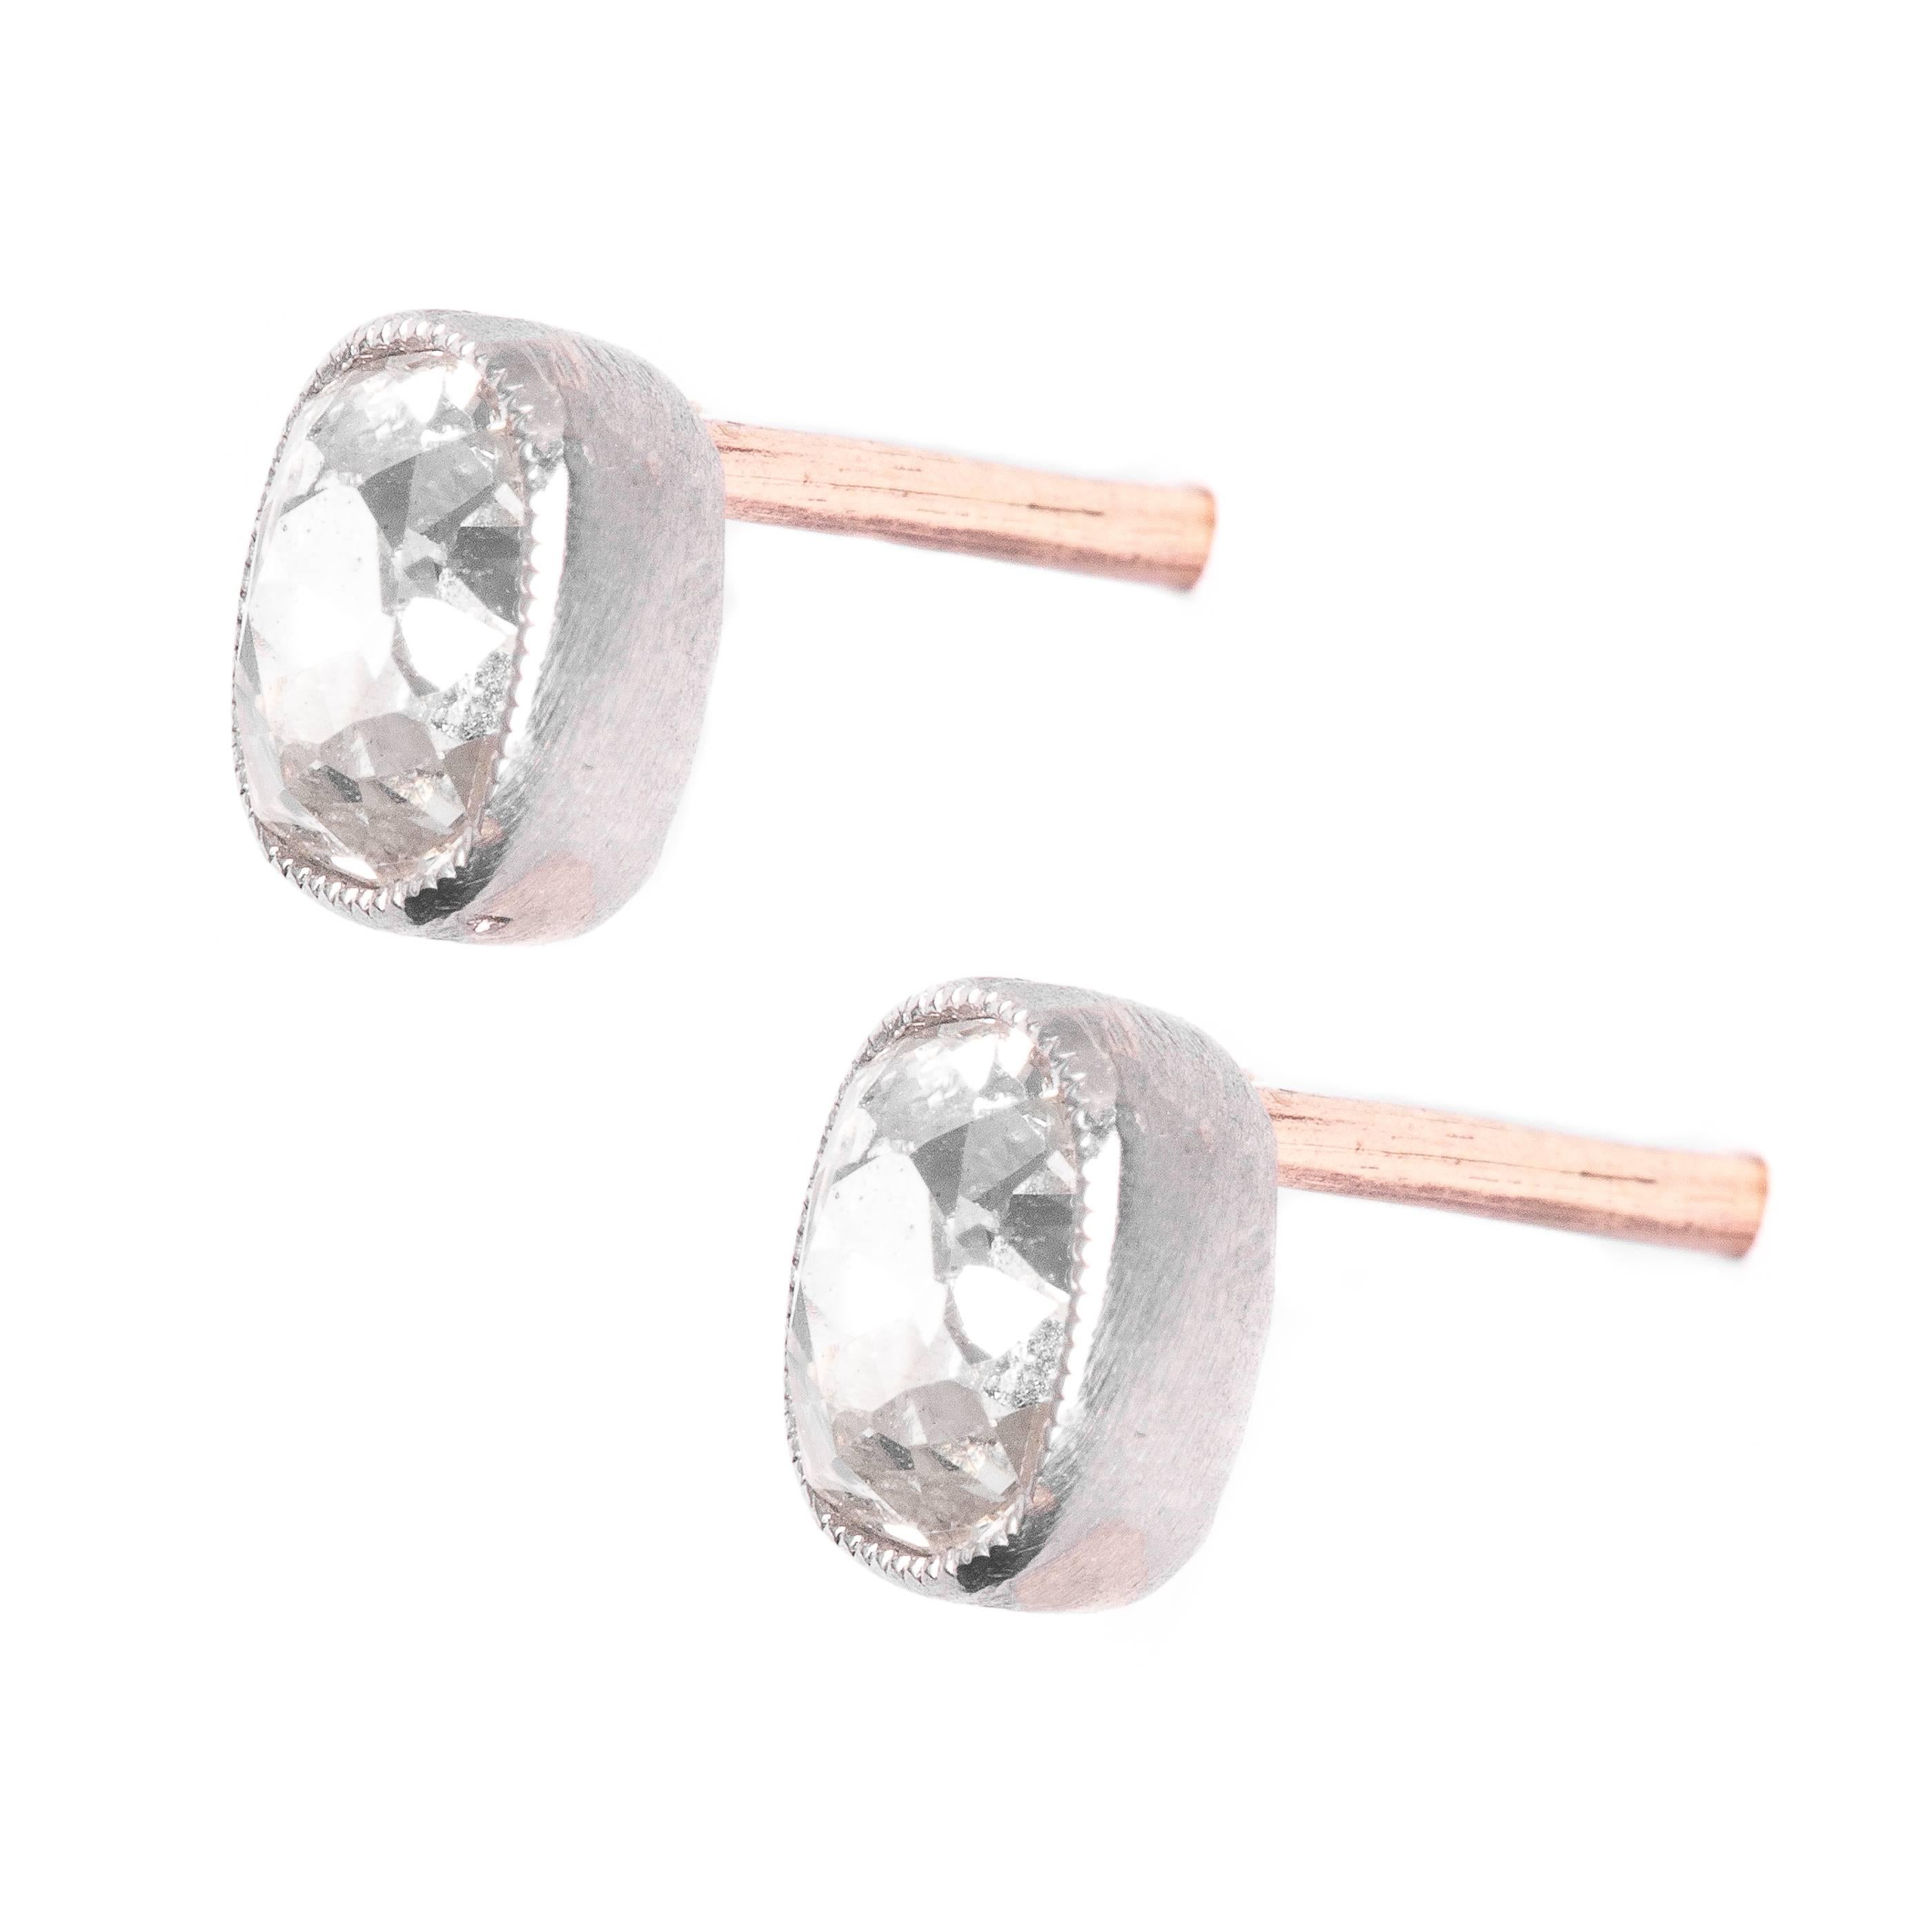 A beautiful pair of  diamond stud earrings in platinum.  Featuring a pair of perfectly matched antique mine cut cushion shaped diamonds, these earrings boast hand mille grained platinum bezel settings.

Grading as beautiful VS2 clarity and H color,